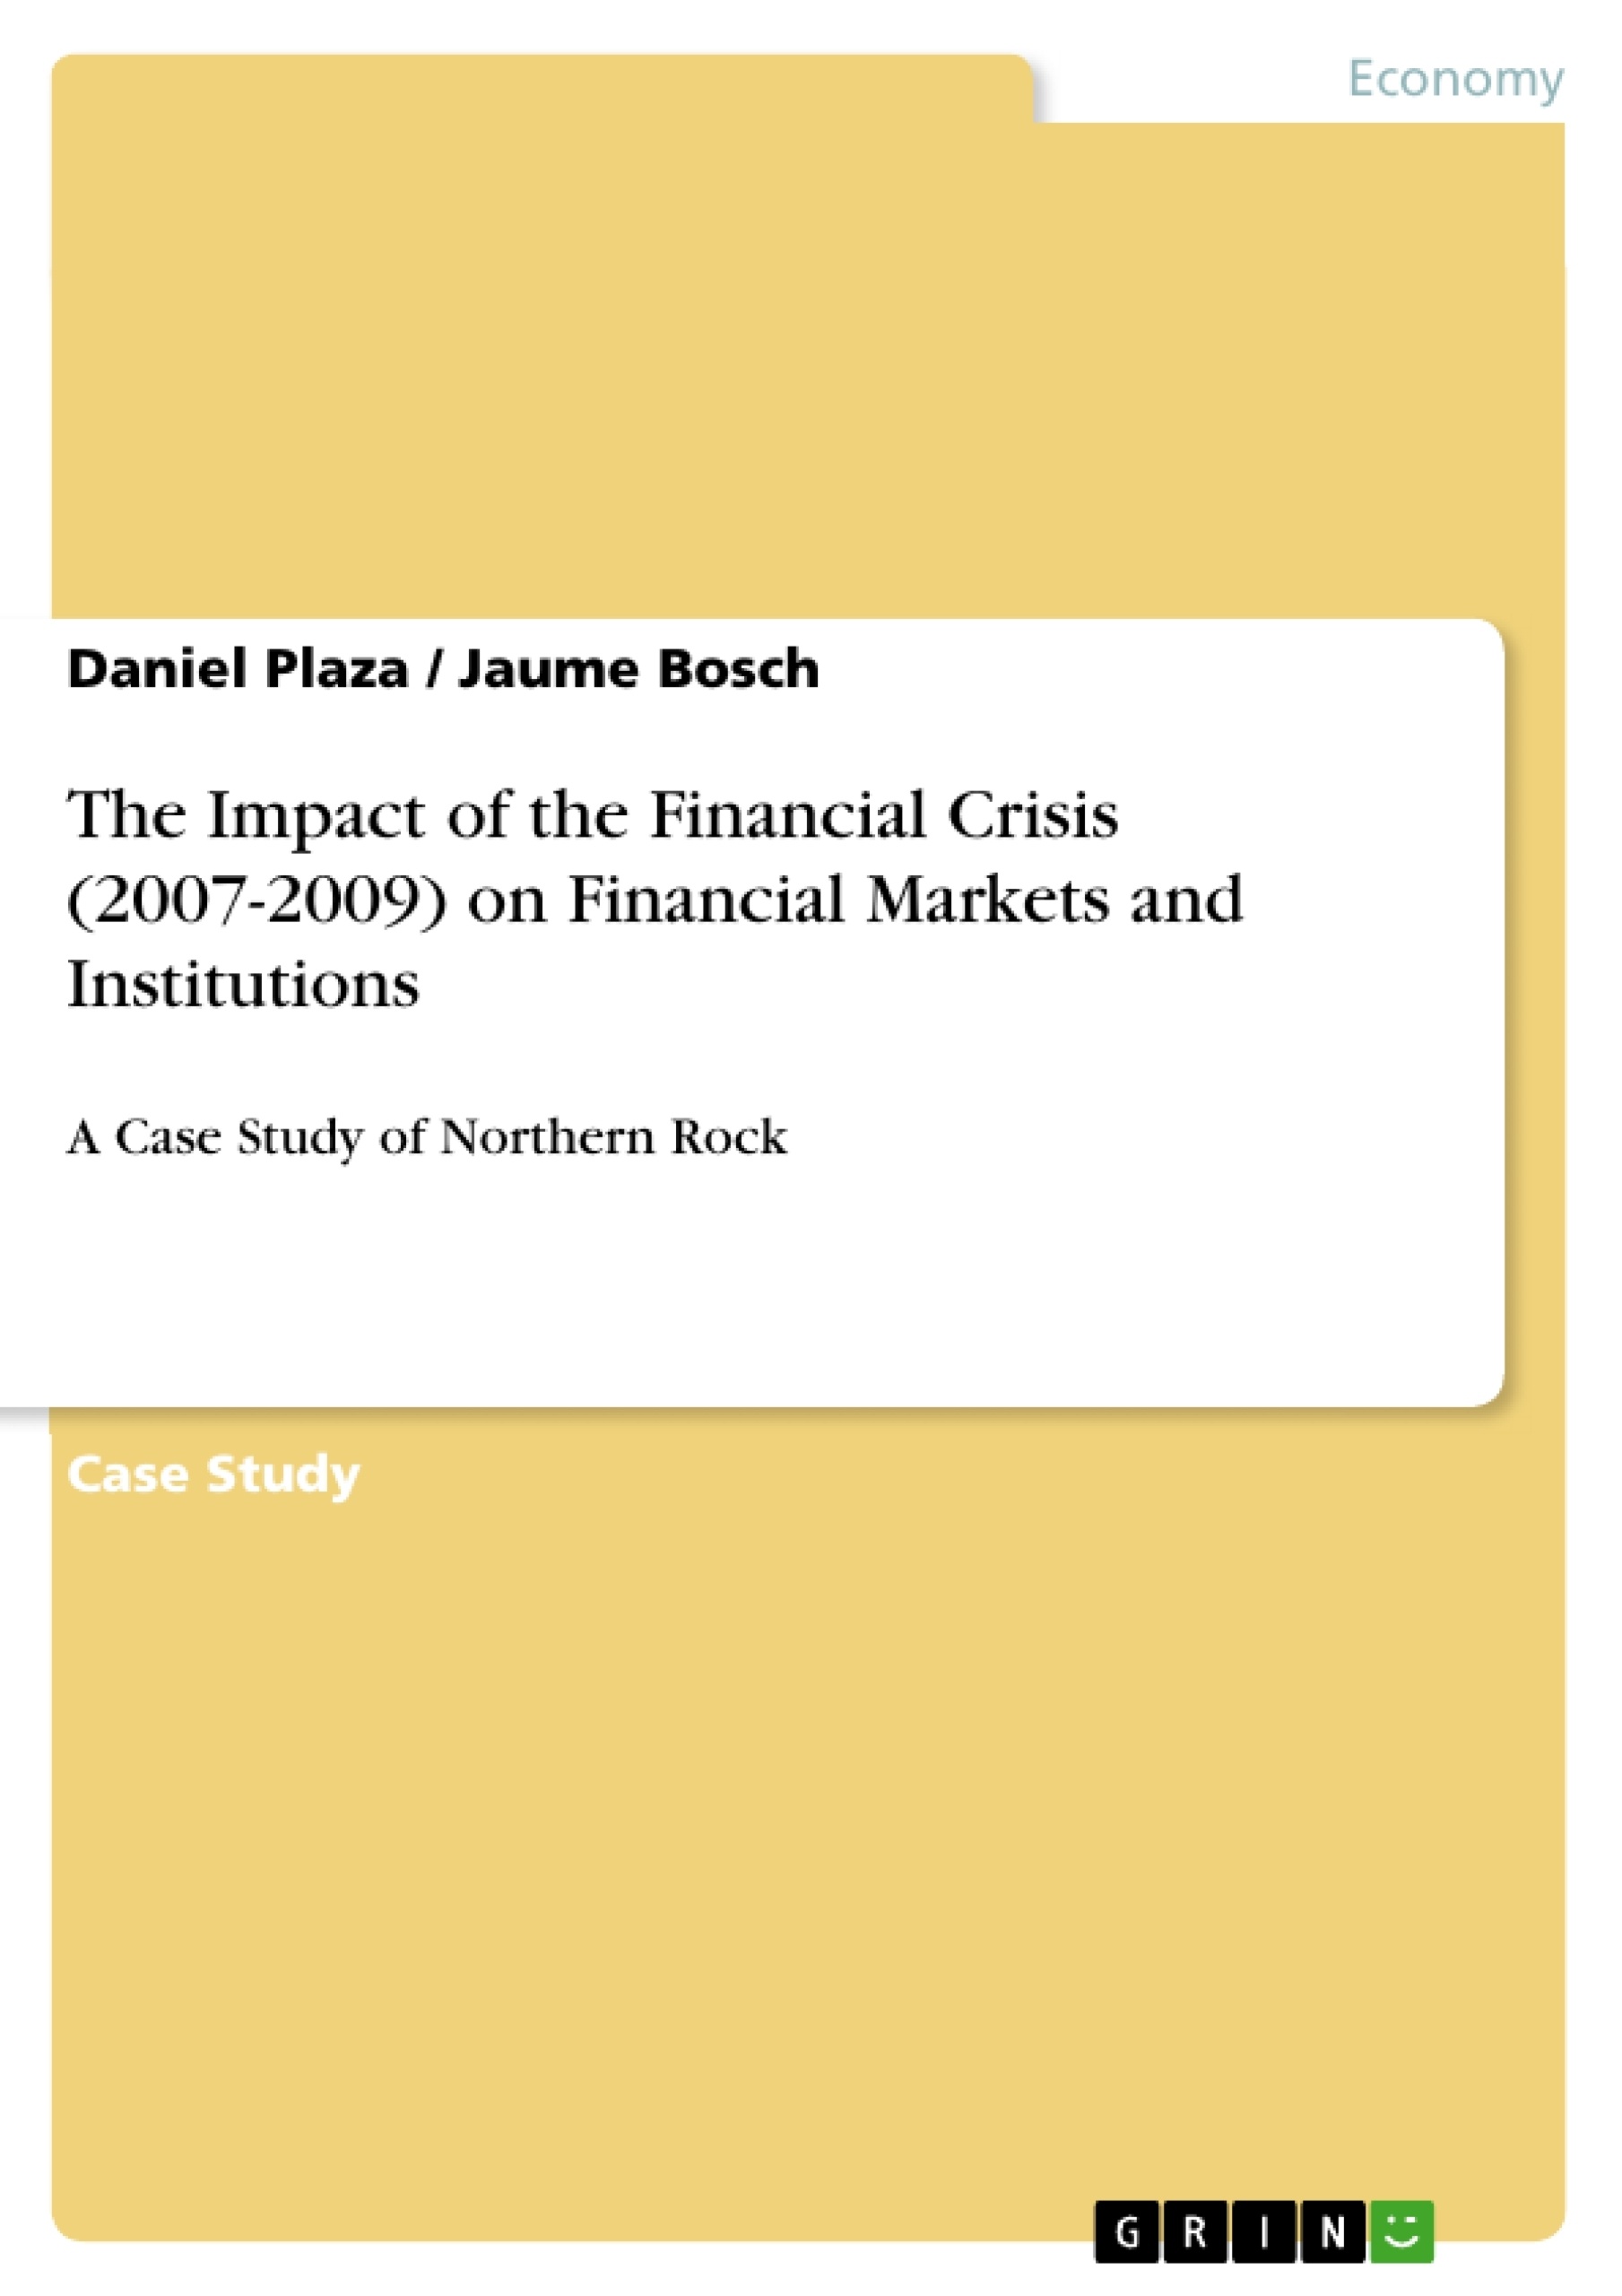 Title: The Impact of the Financial Crisis (2007-2009) on Financial Markets and Institutions